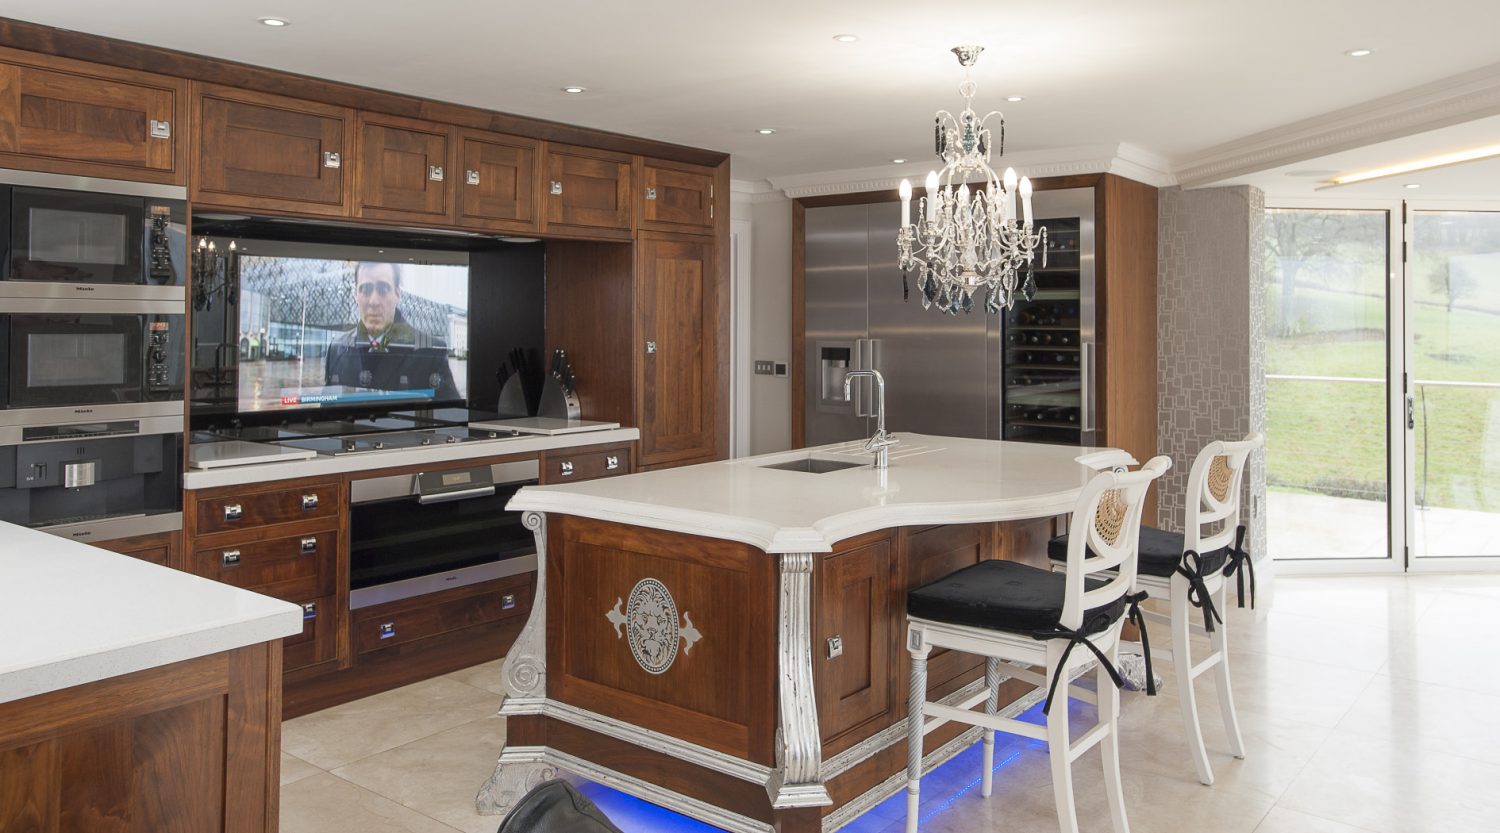 A large TV has been artfully set behind protective glass above the hob so Richard can watch the football while cooking. Also in the kitchen is a full height cabinet that, when opened, reveals more technology than GCHQ – technology that runs the house’s state-of-the-art audio-visual systems